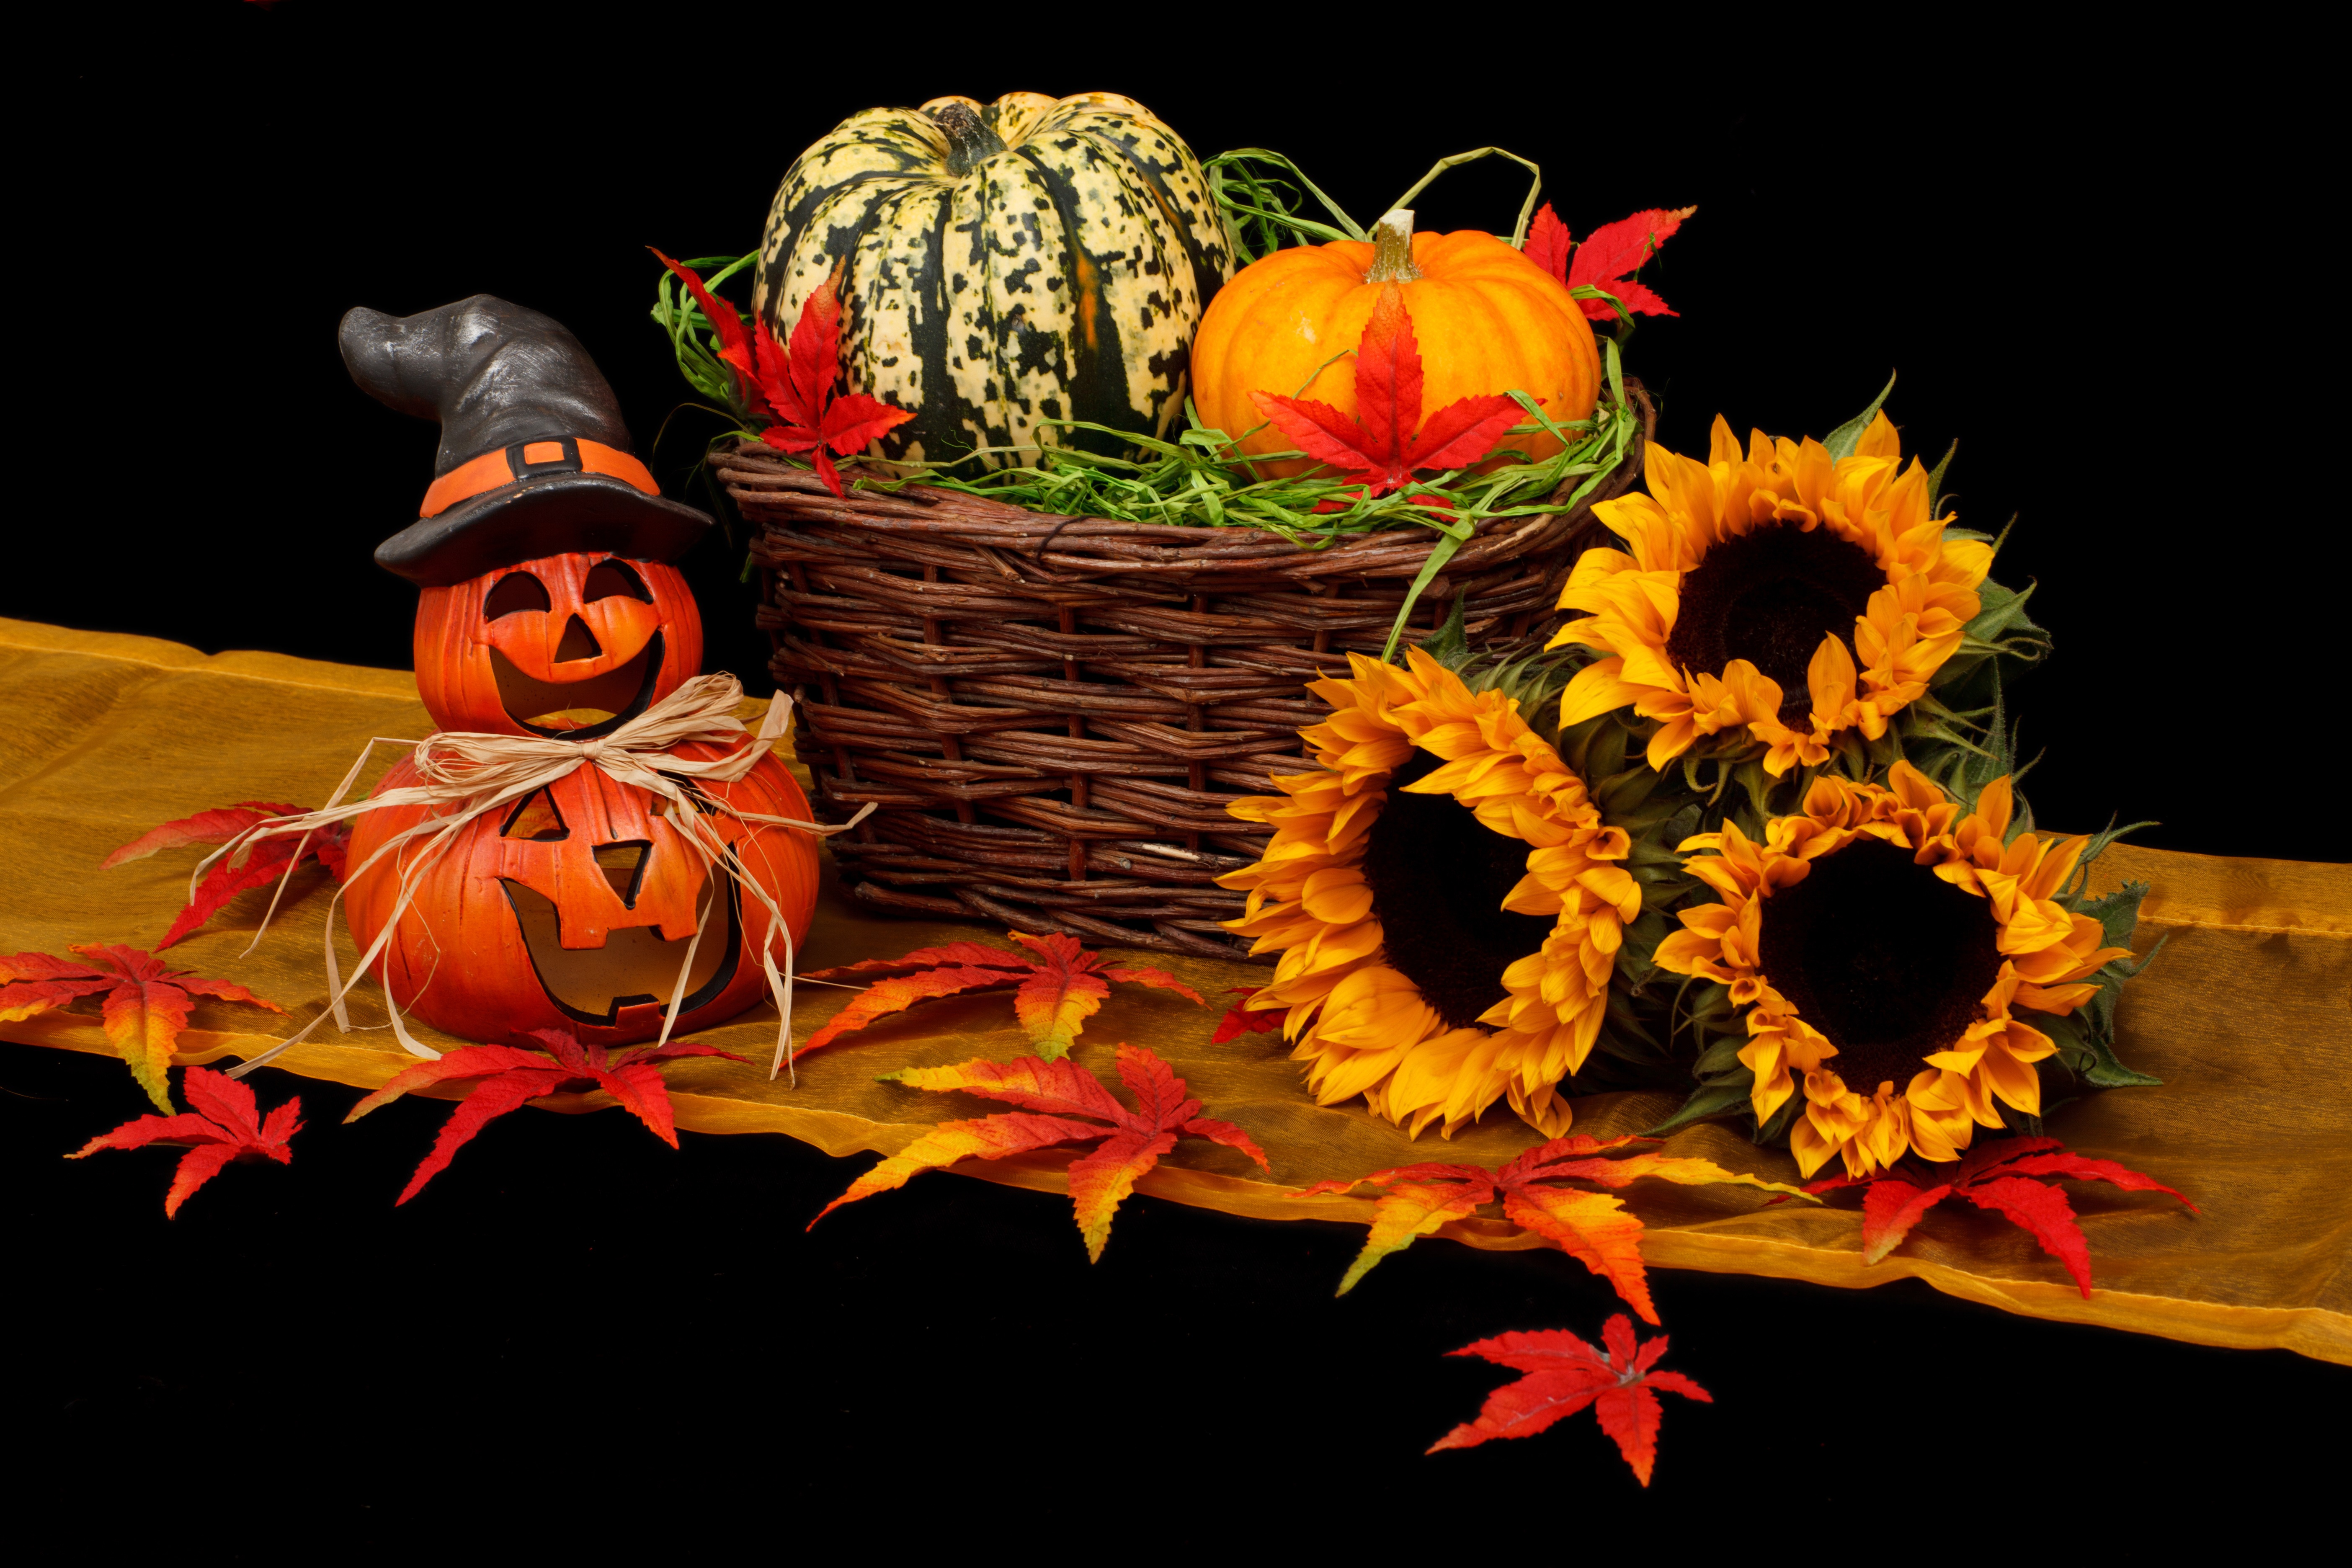 Basket with pumpkins for Halloween holiday